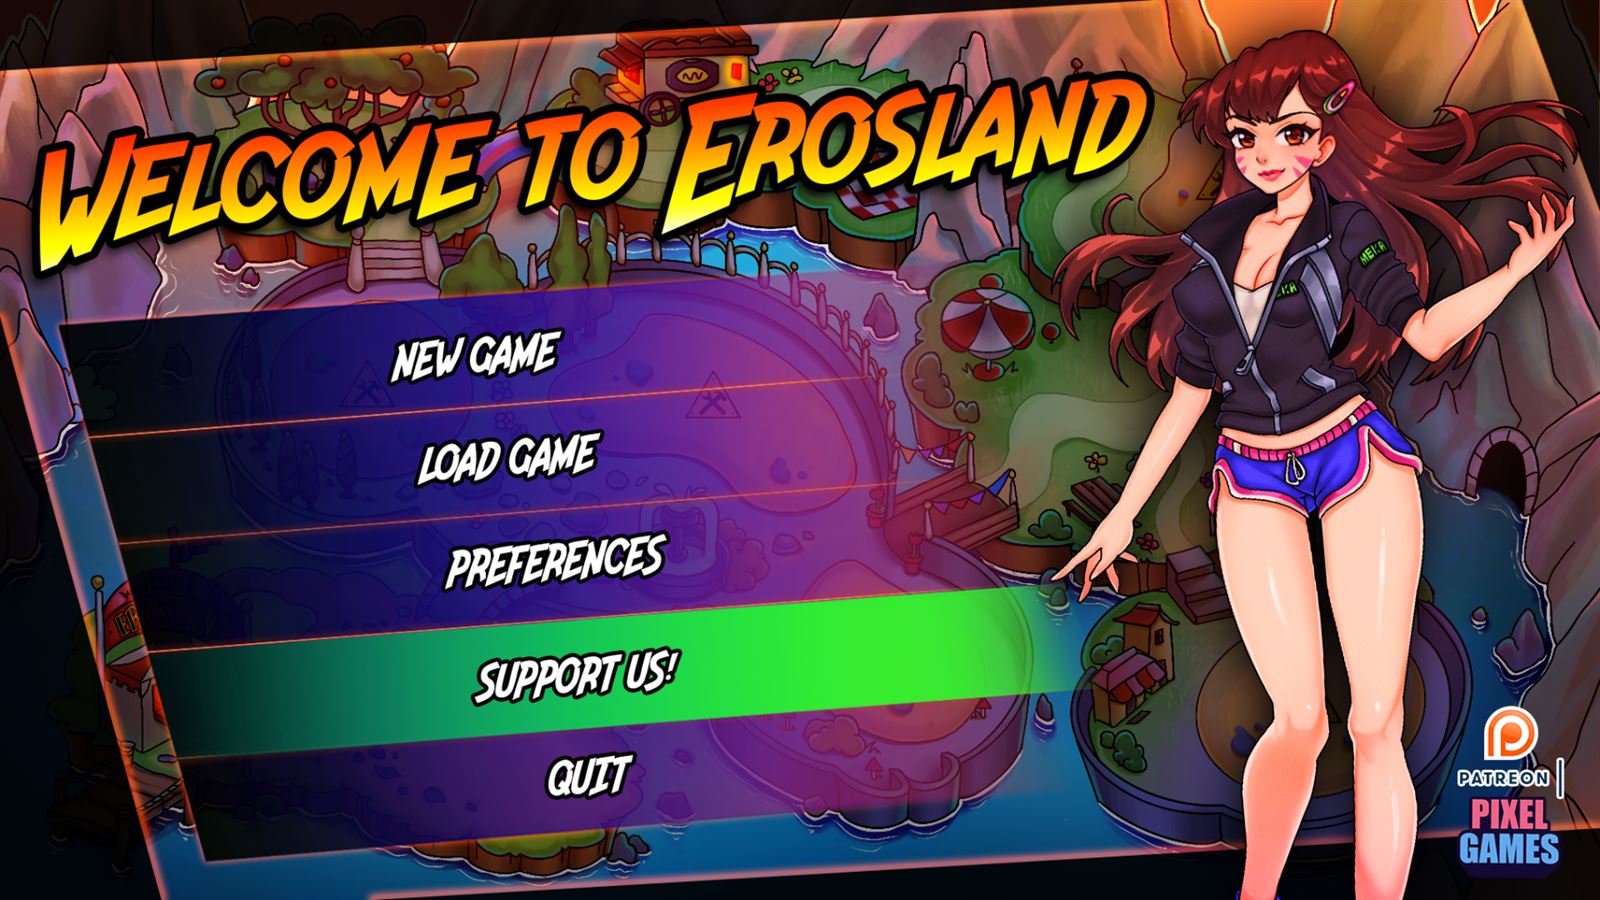 Ren'py] Welcome to Erosland - v0.0.11.5 by PiXel Games 18+ Adult xxx Porn  Game Download